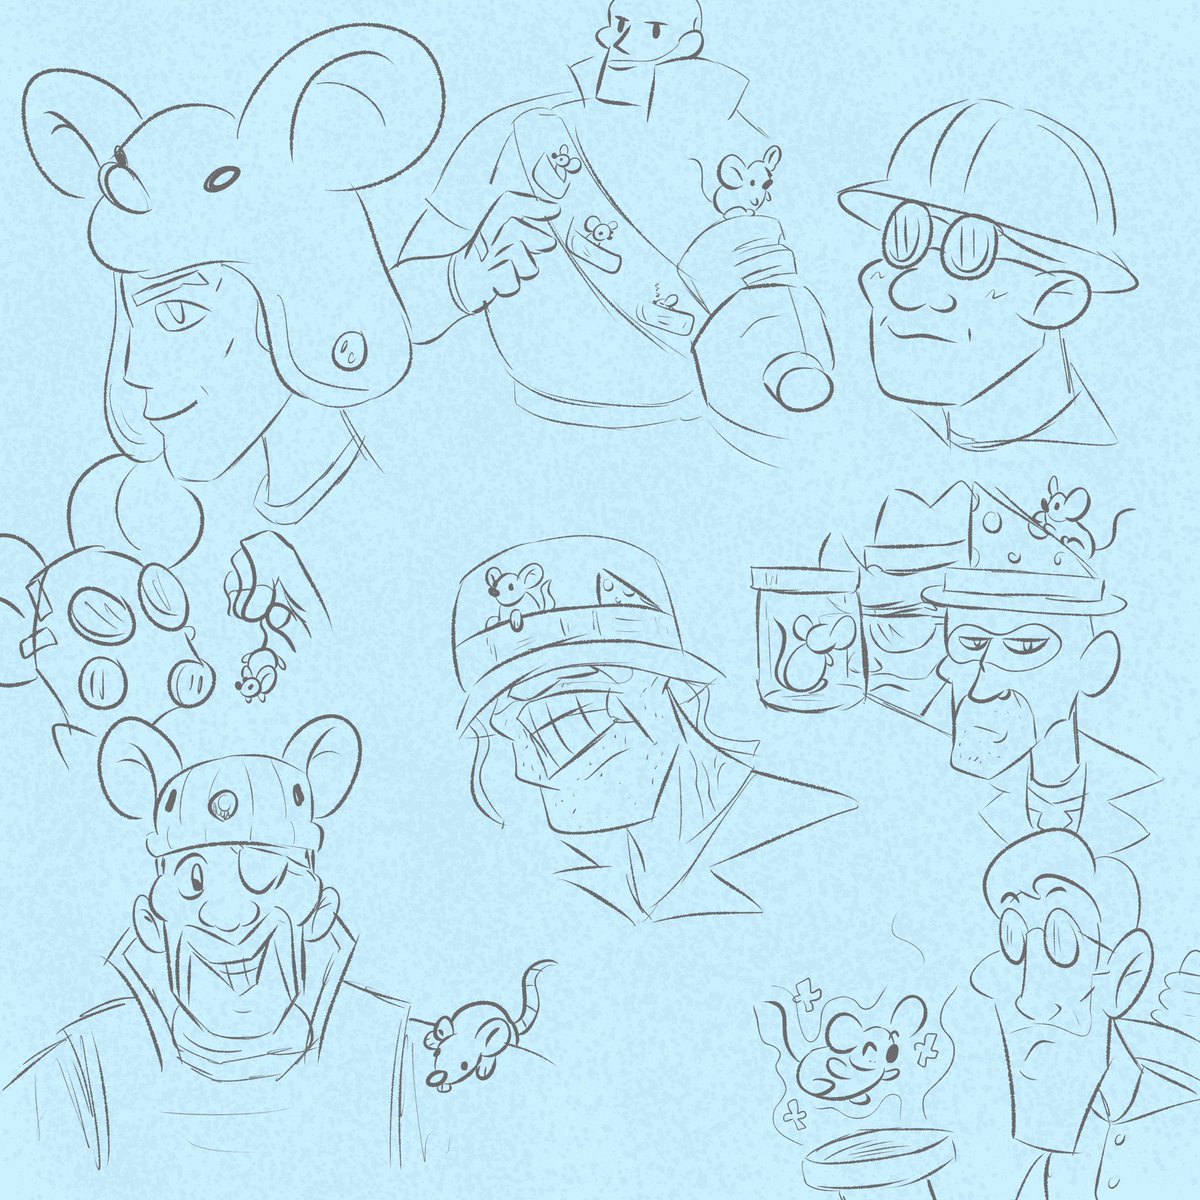 Drawings from last night. They said there weren't enough rat-related stuff in Tf2. 